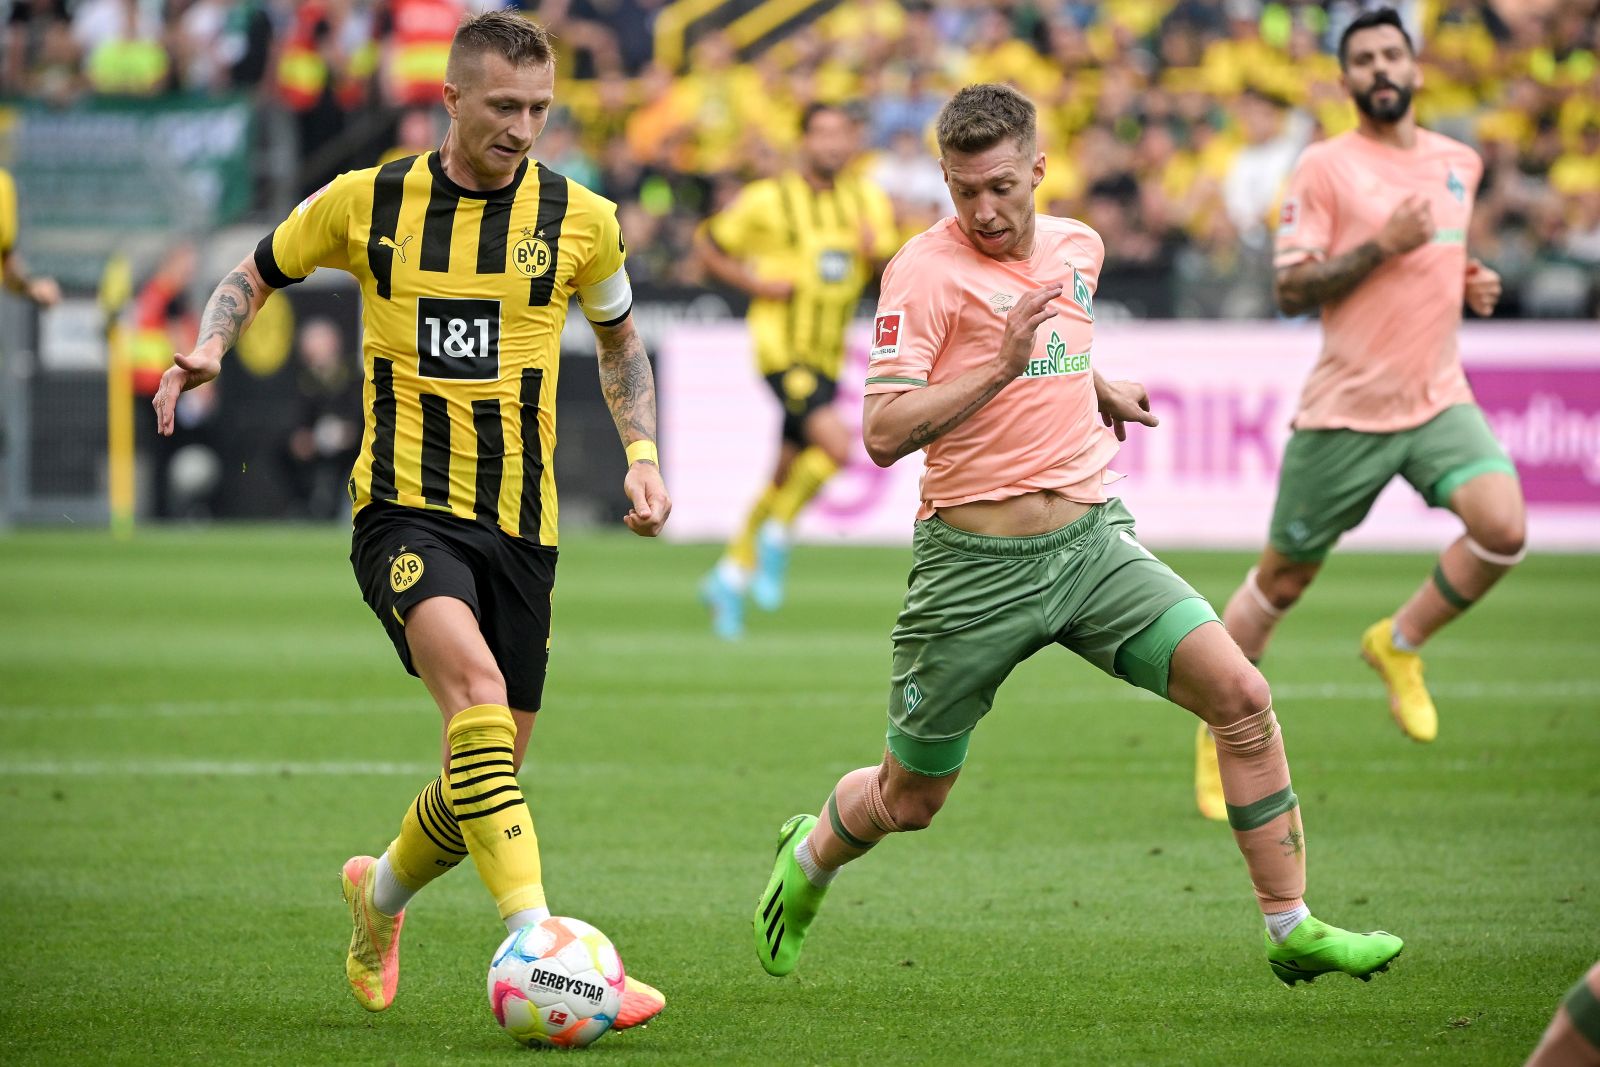 epa10130394 Dortmund's Marco Reus (L) in action against Bremen's Mitchell Weiser (R) during the German Bundesliga soccer match between Borussia Dortmund and Werder Bremen in Dortmund, Germany, 20 August 2022.  EPA/SASCHA STEINBACH CONDITIONS - ATTENTION: The DFL regulations prohibit any use of photographs as image sequences and/or quasi-video.